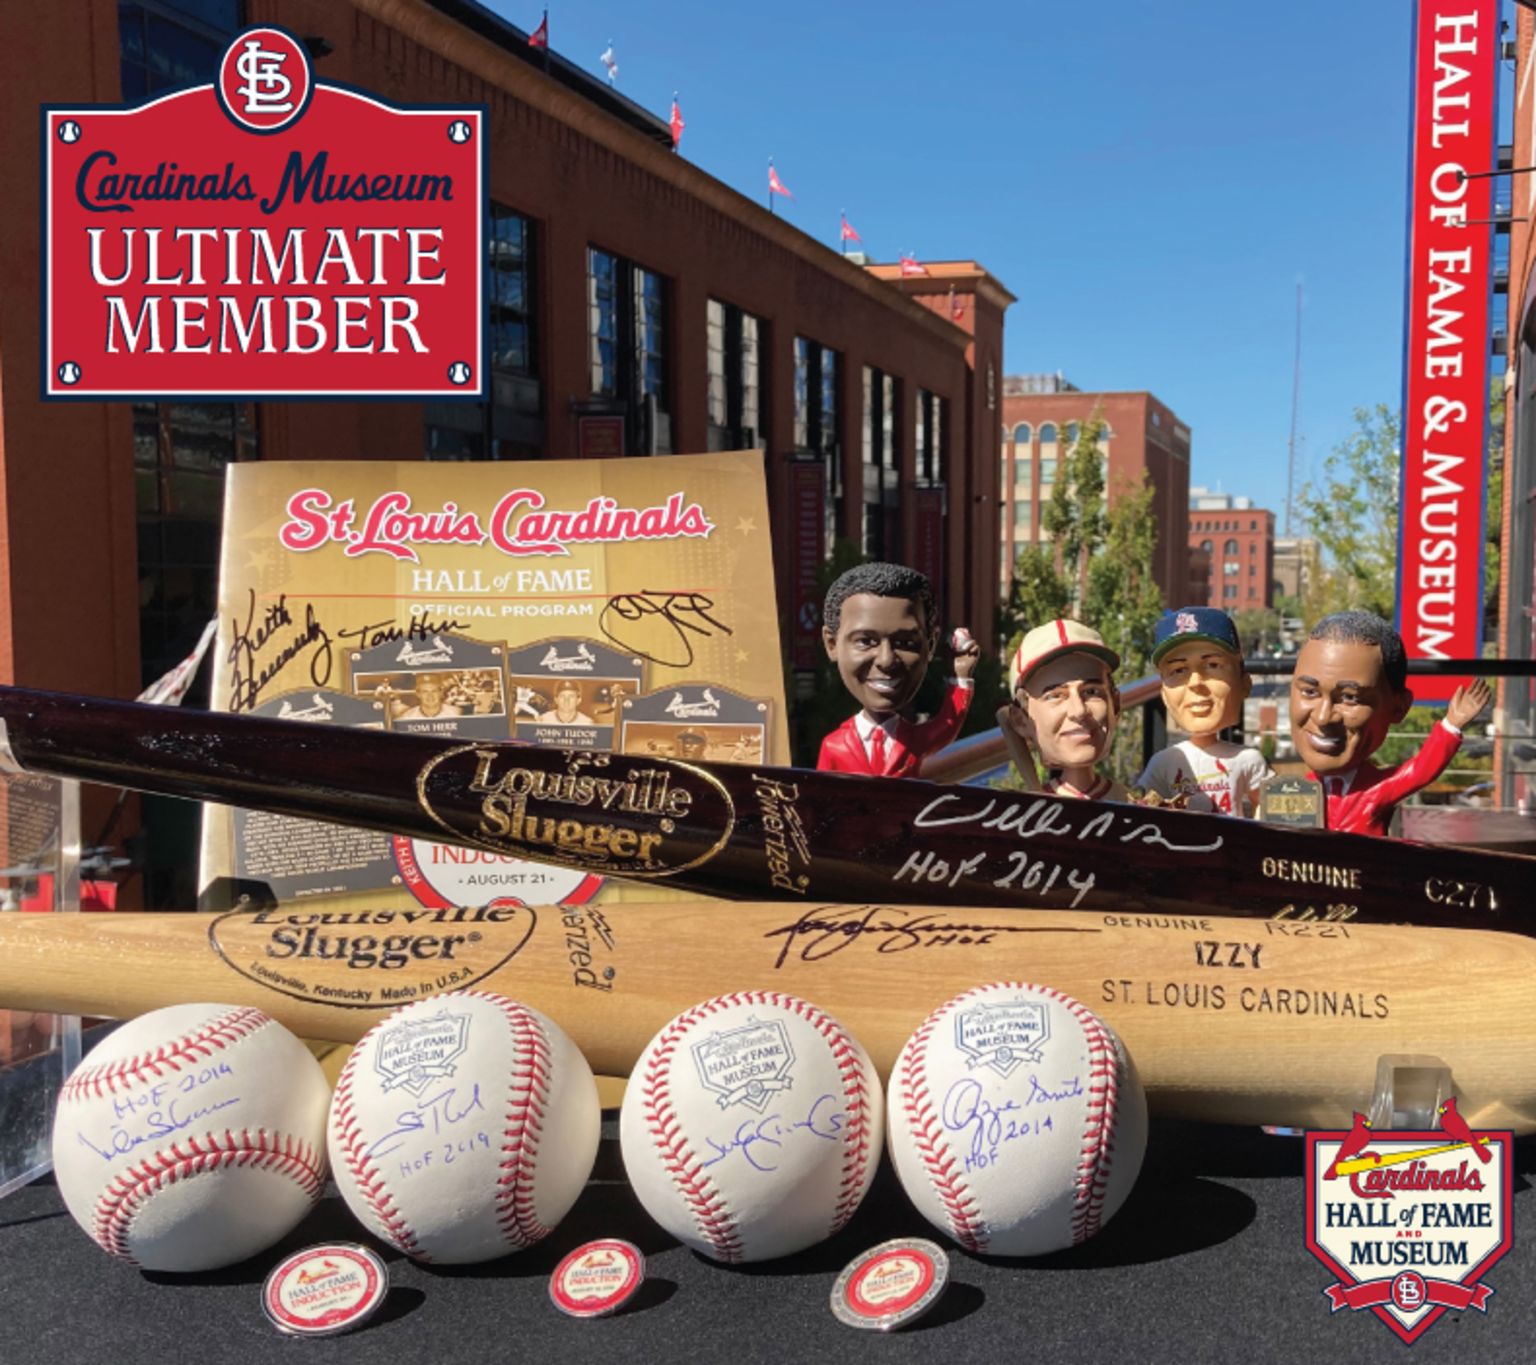 Cardinals Hall of Fame and Museum